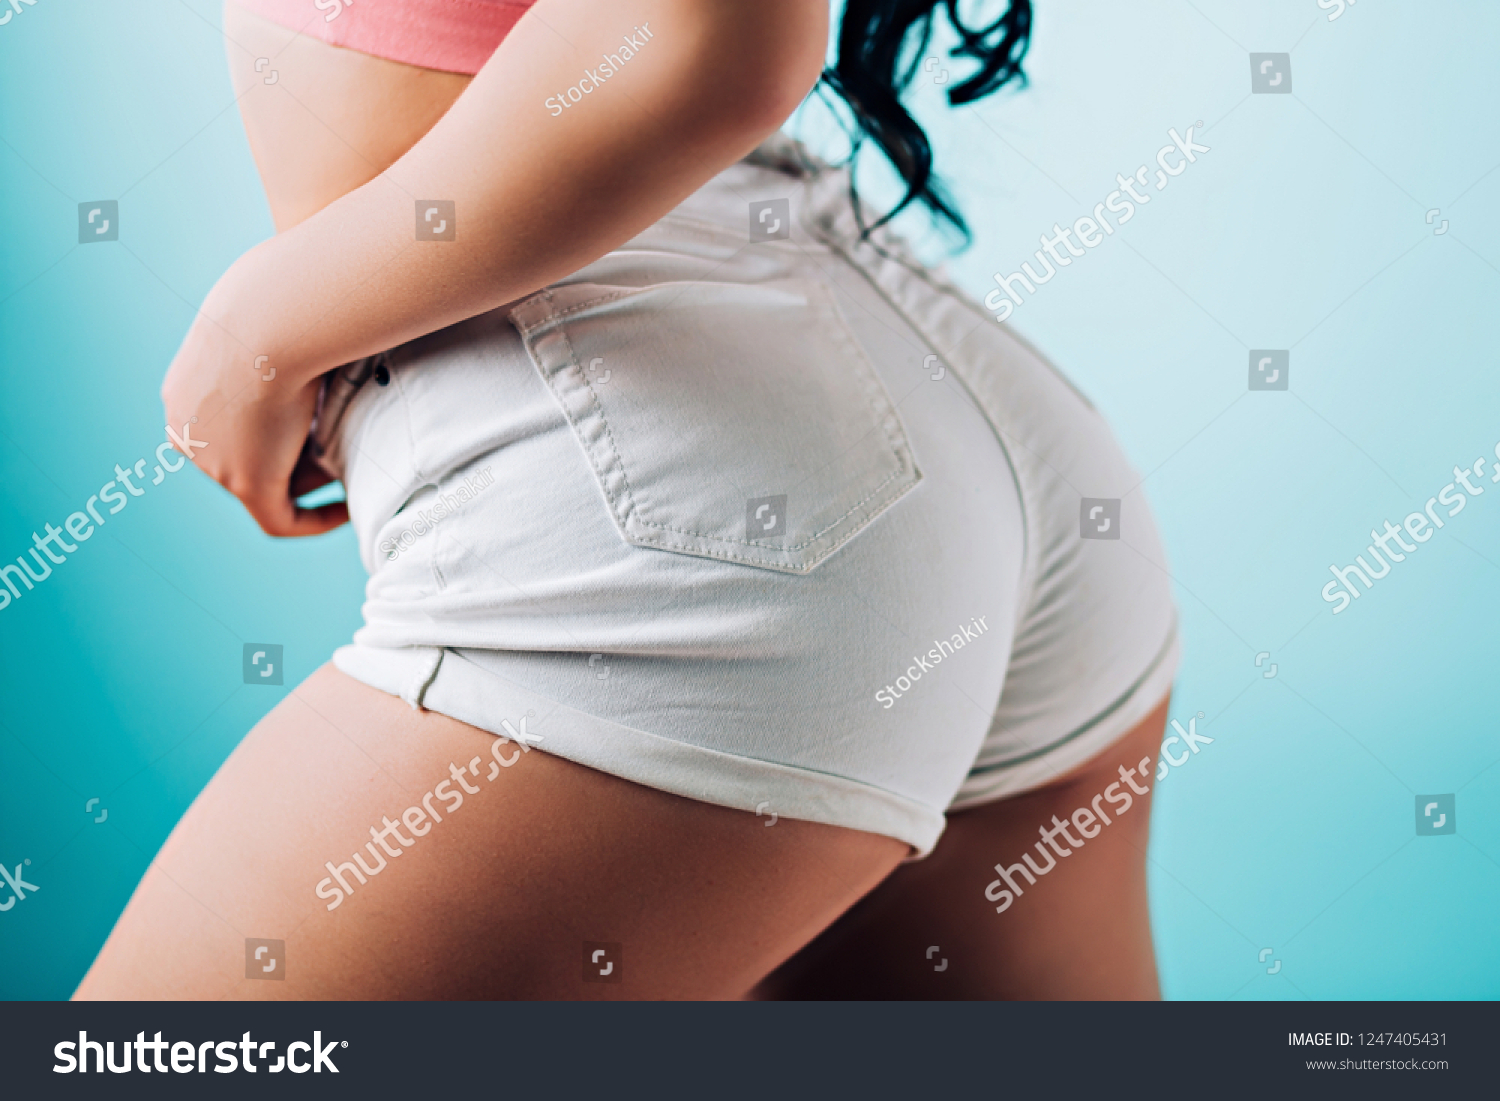 Phat White Booty Pictures fed a